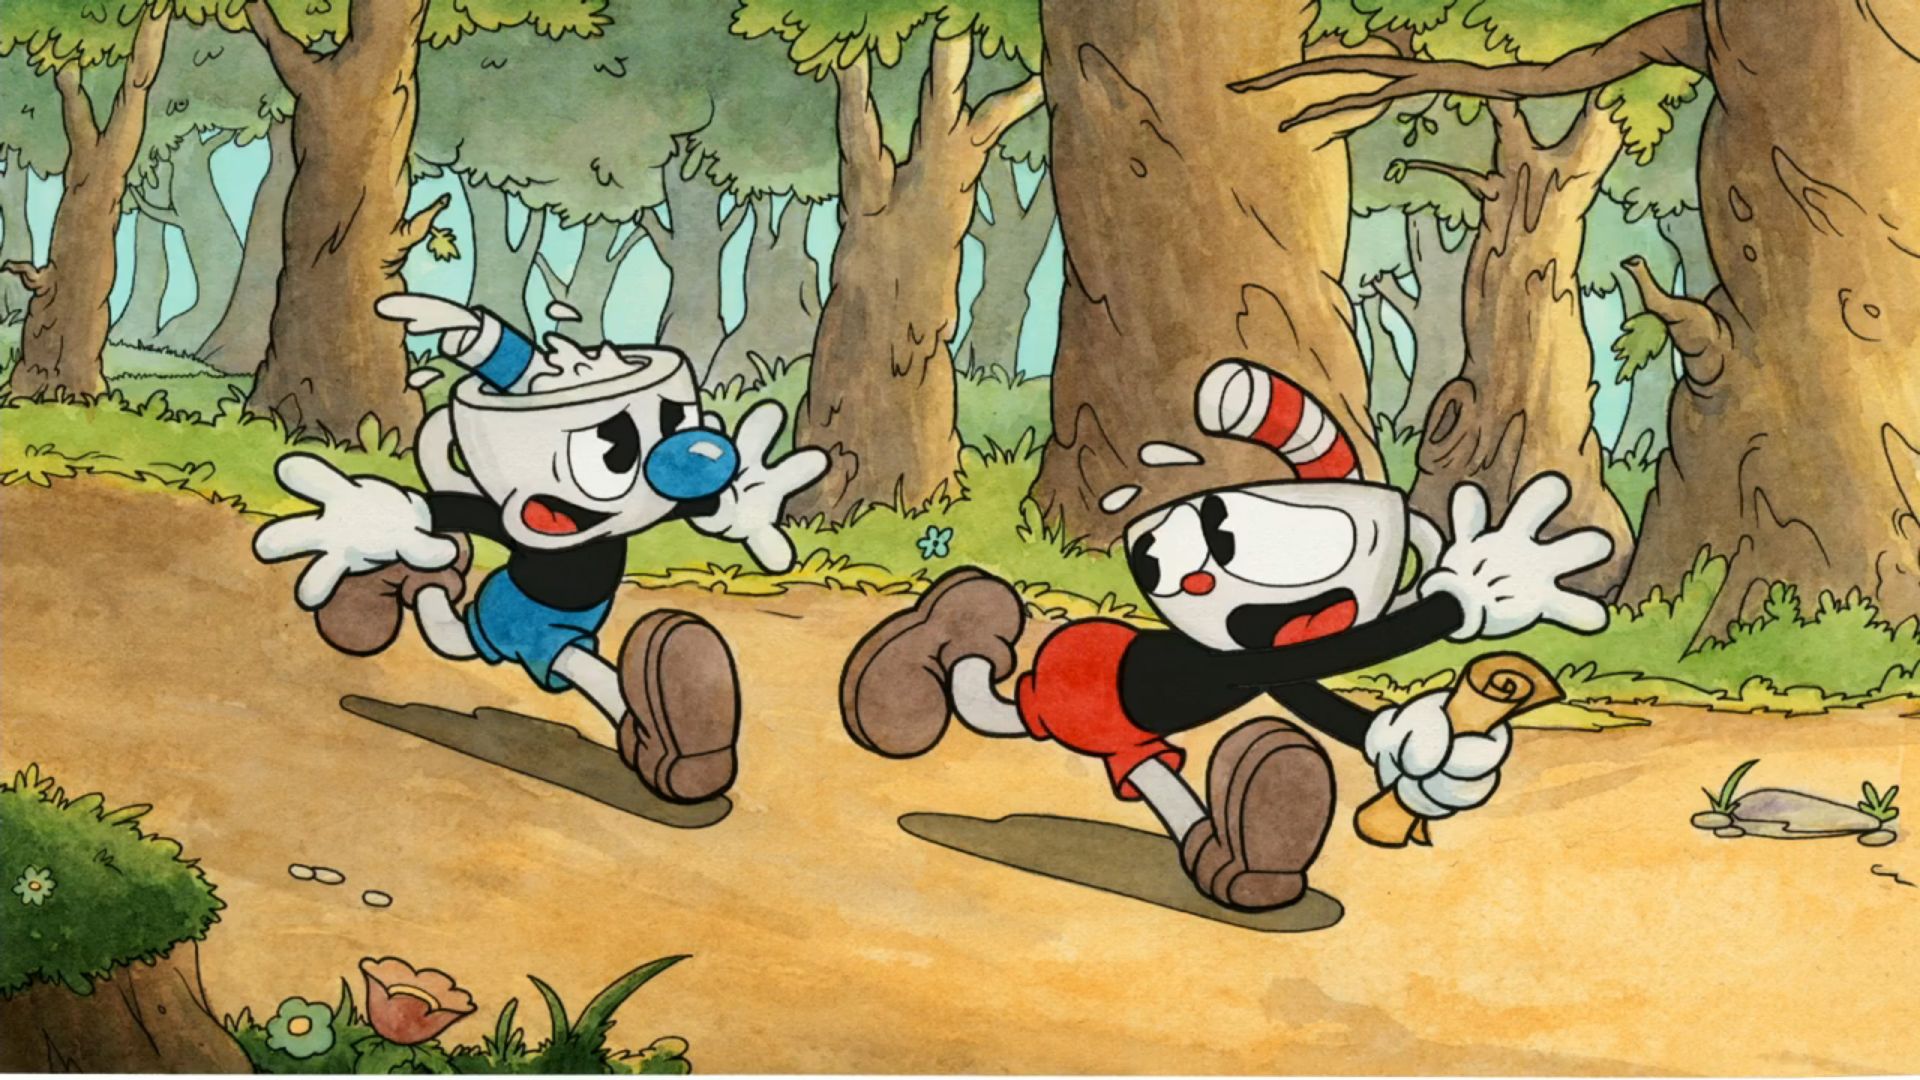 cuphead full game free download